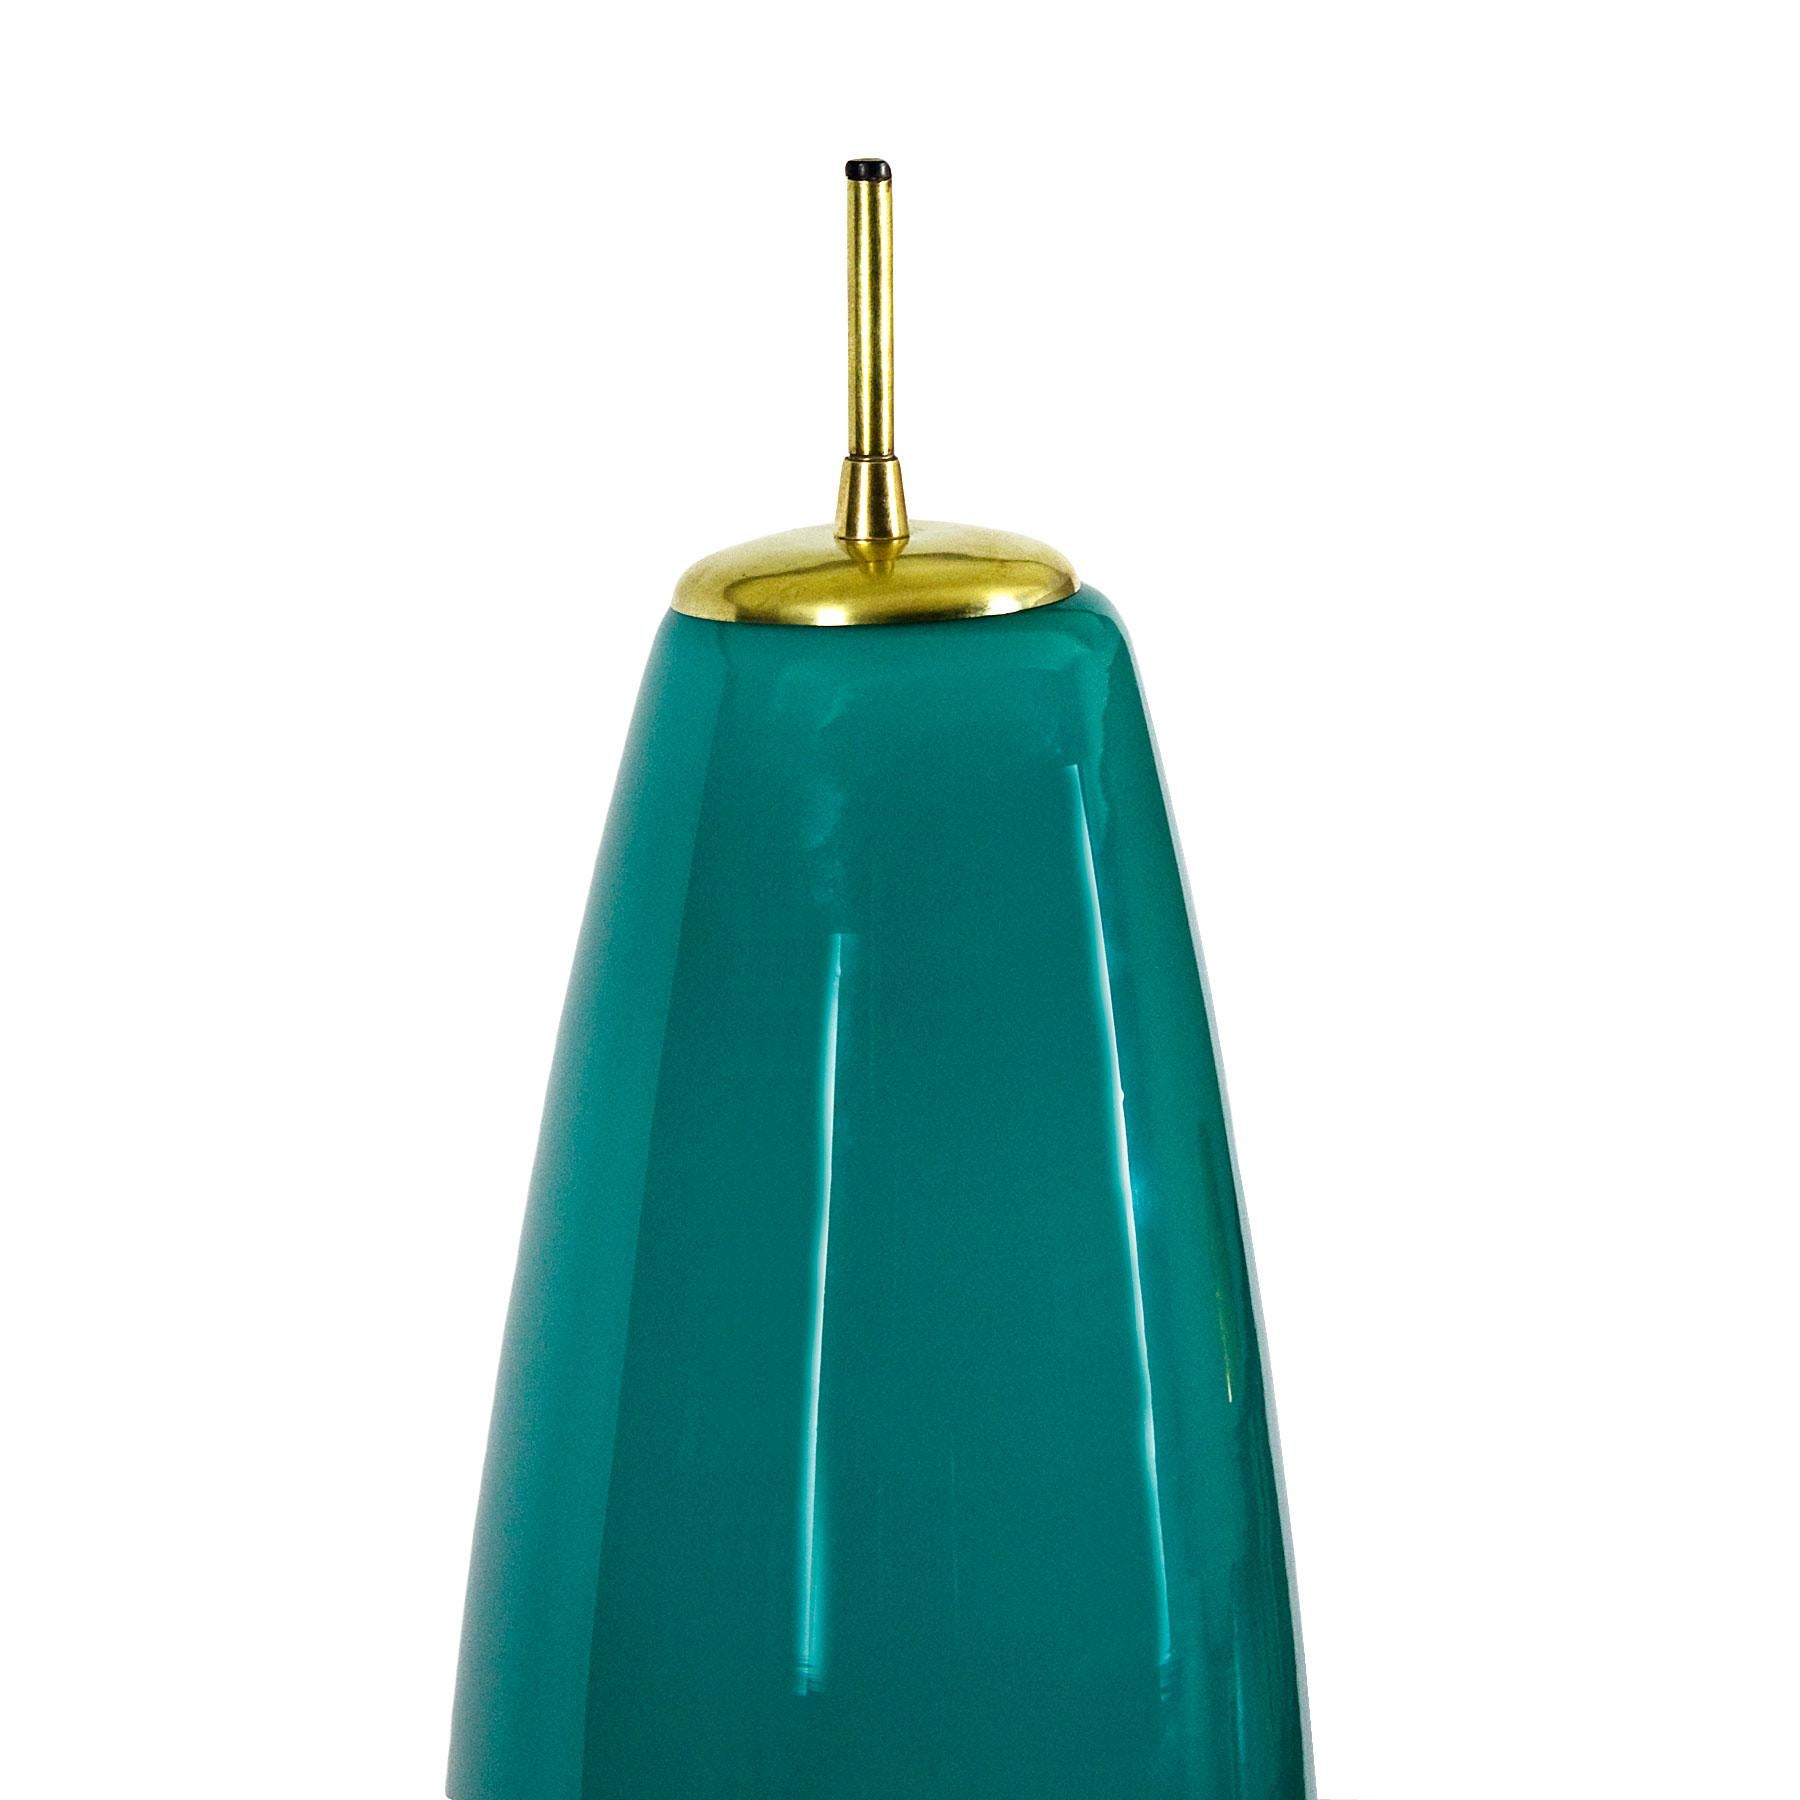 Steel Mid-Century Modern Tripod Standing Lamp With Turquoise Glass - Italy, 1960s For Sale